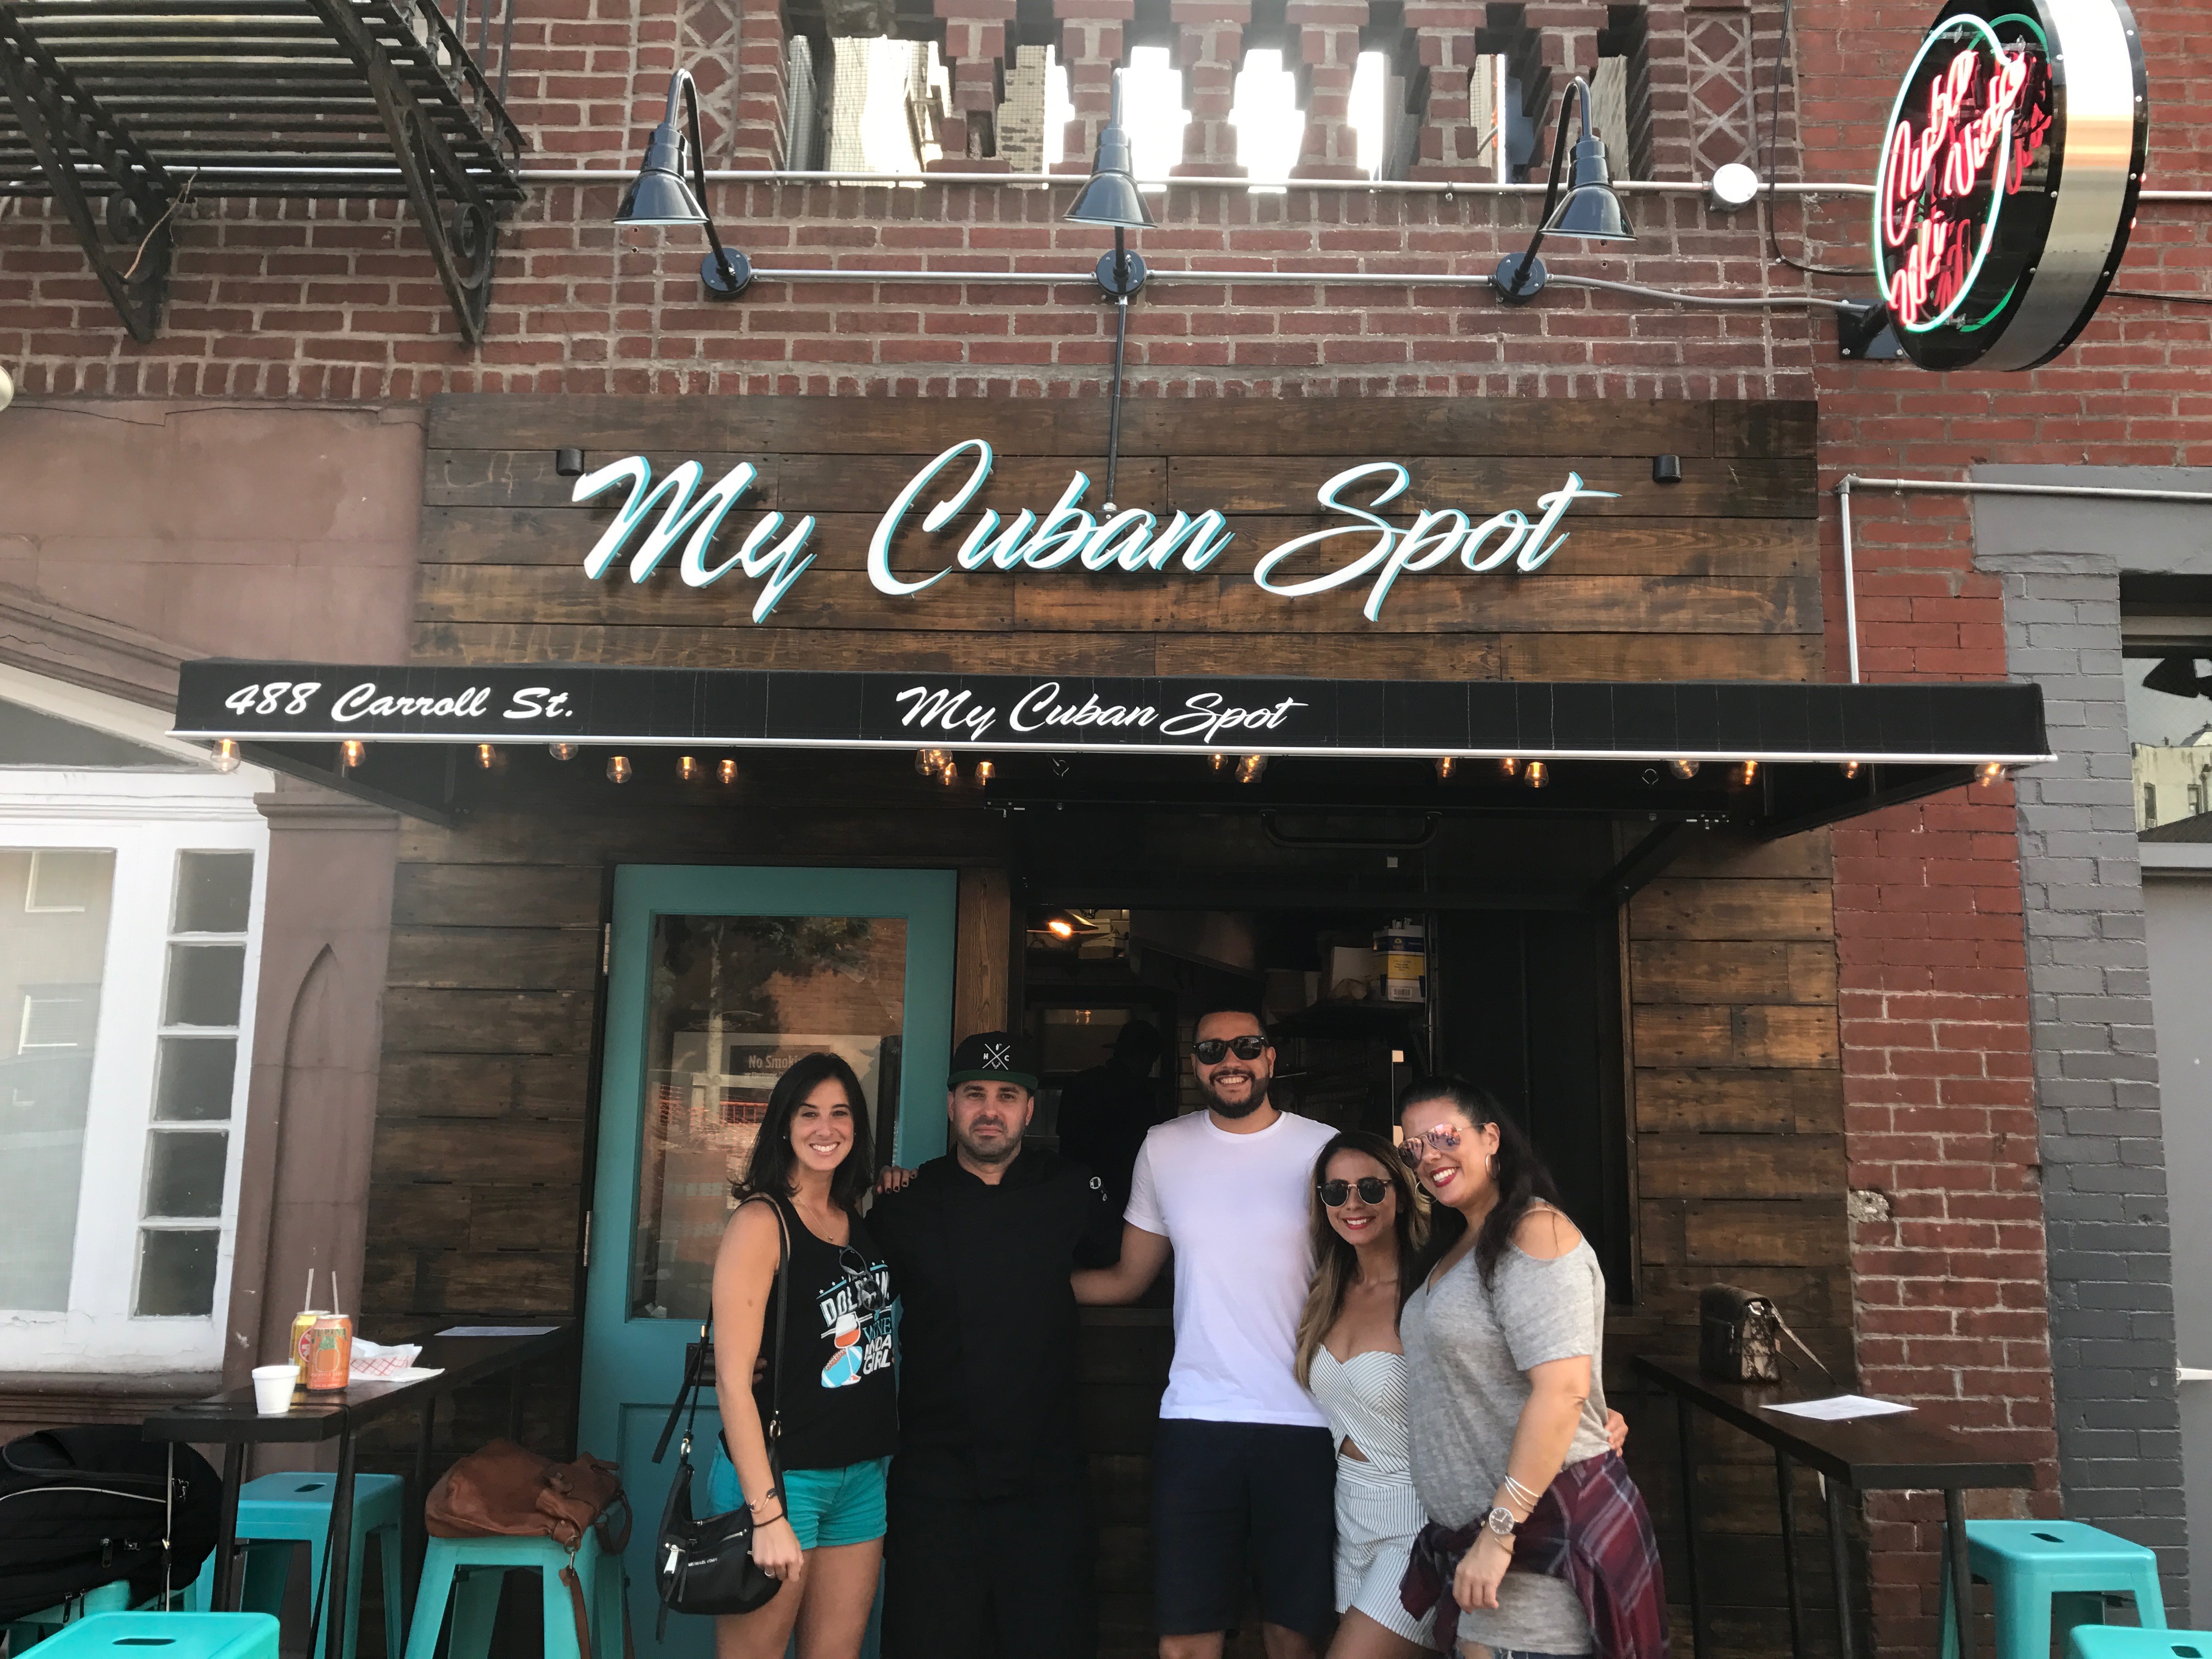 My Cuban Spot: Authentic Cuban Cuisine in NYC (FINALLY!) – Girls on Food